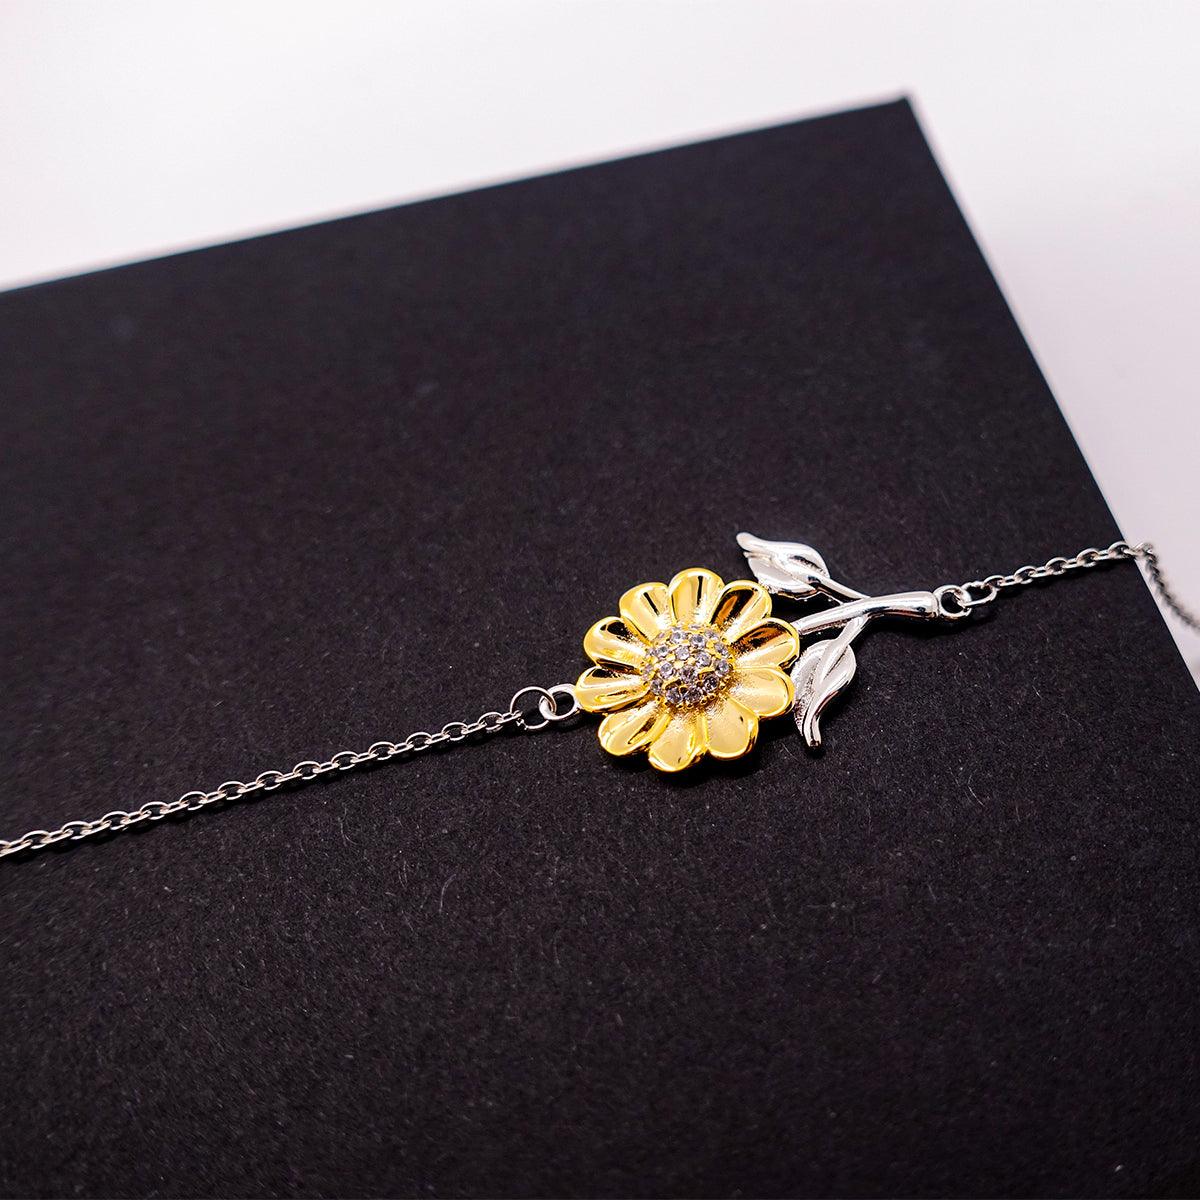 Physical Therapist Sunflower Bracelet - Thanks for being who you are - Birthday Christmas Jewelry Gifts Coworkers Colleague Boss - Mallard Moon Gift Shop